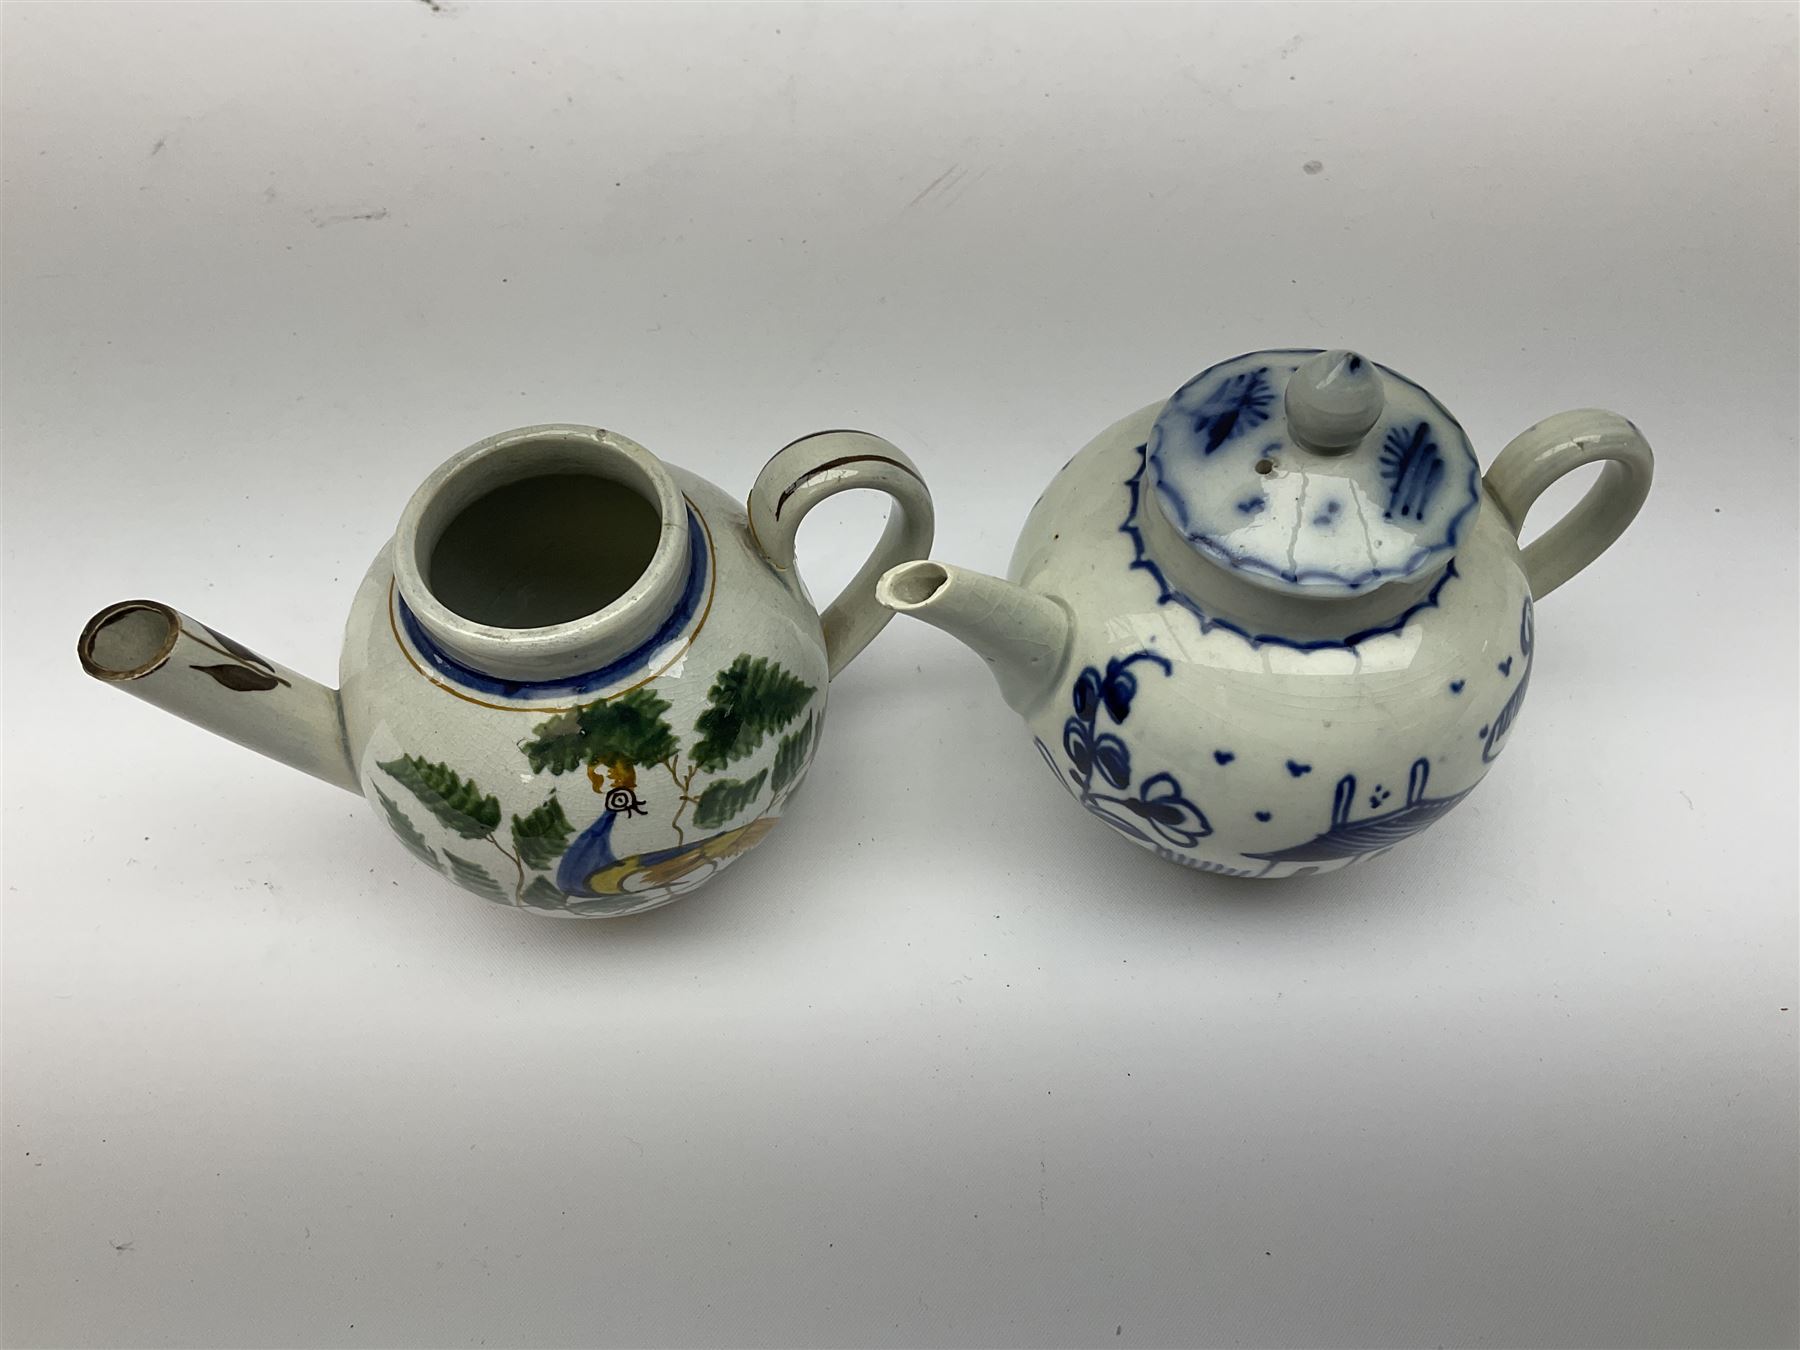 Two 18th century miniature or toy pearlware teapots - Image 2 of 8